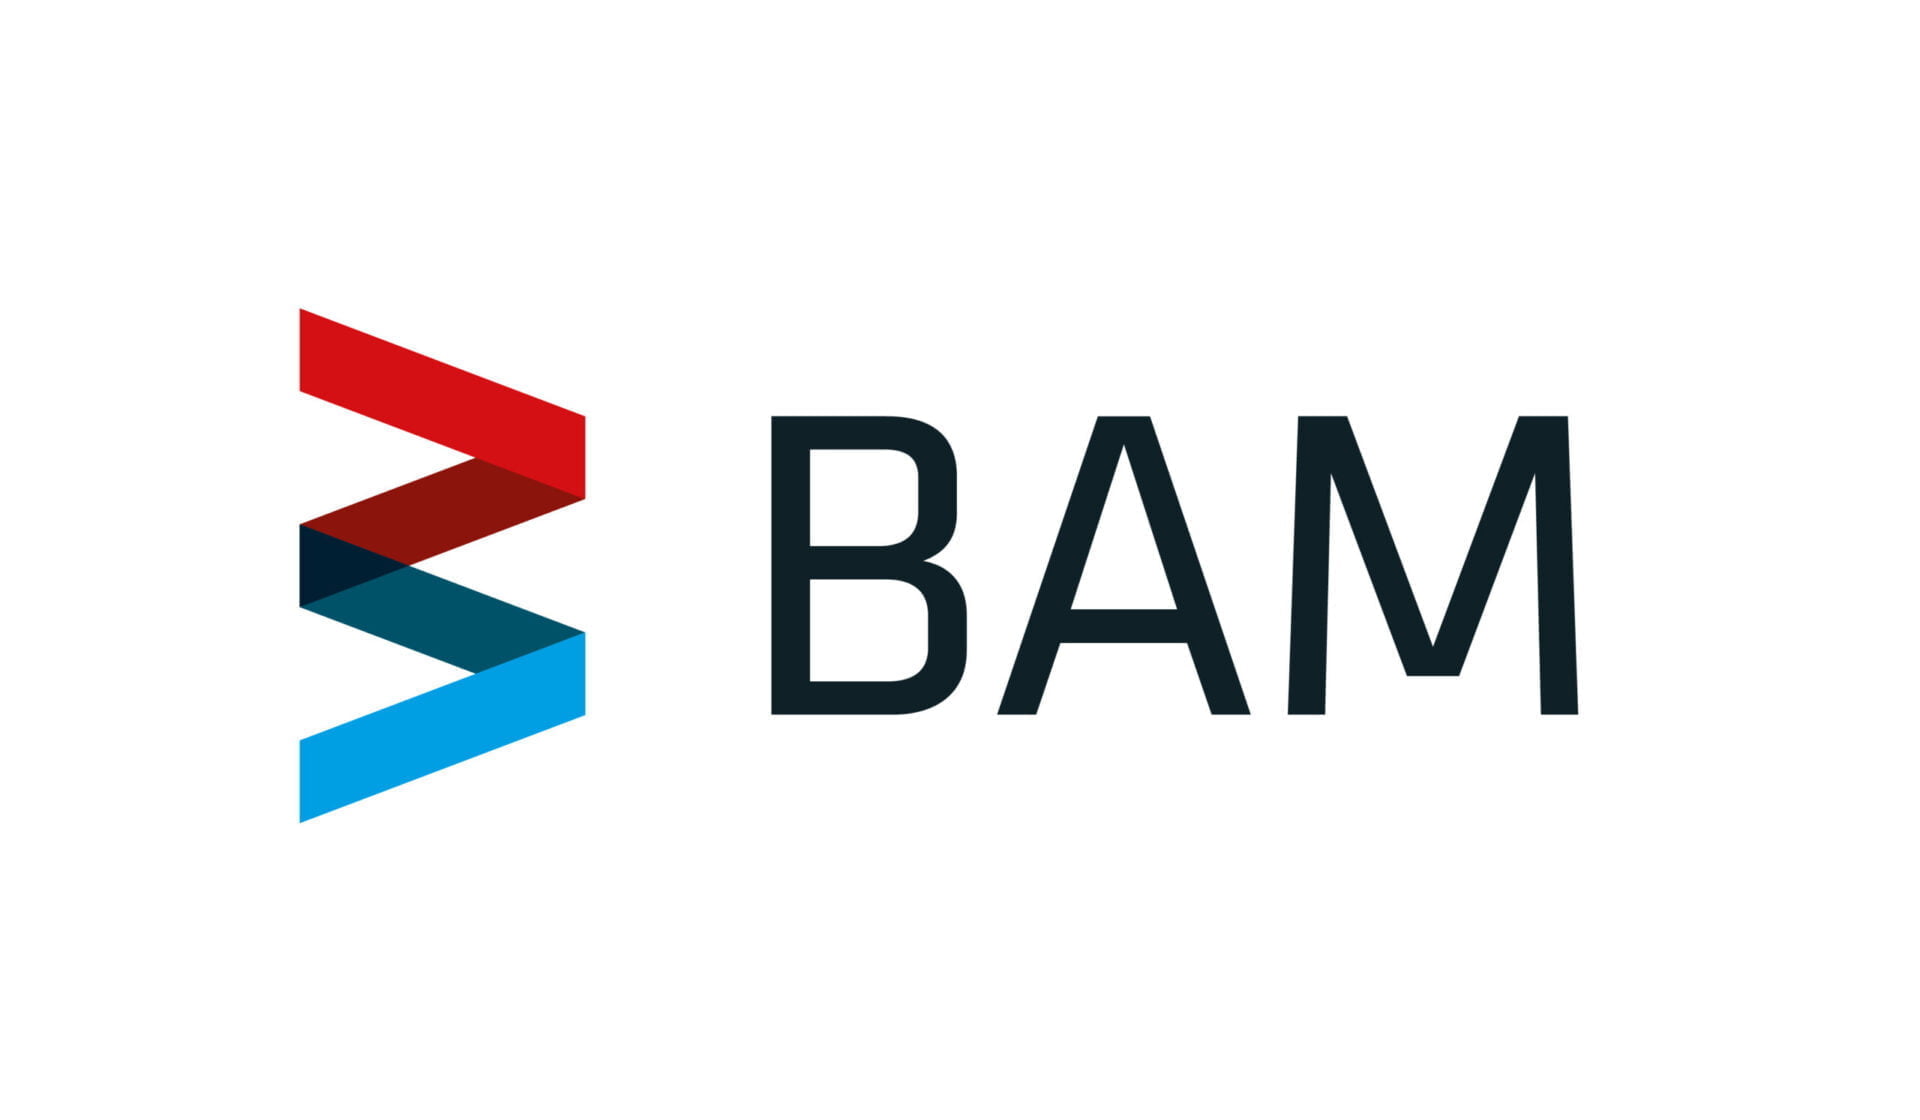 BAM logo with stylized red, black, and blue ribbon design